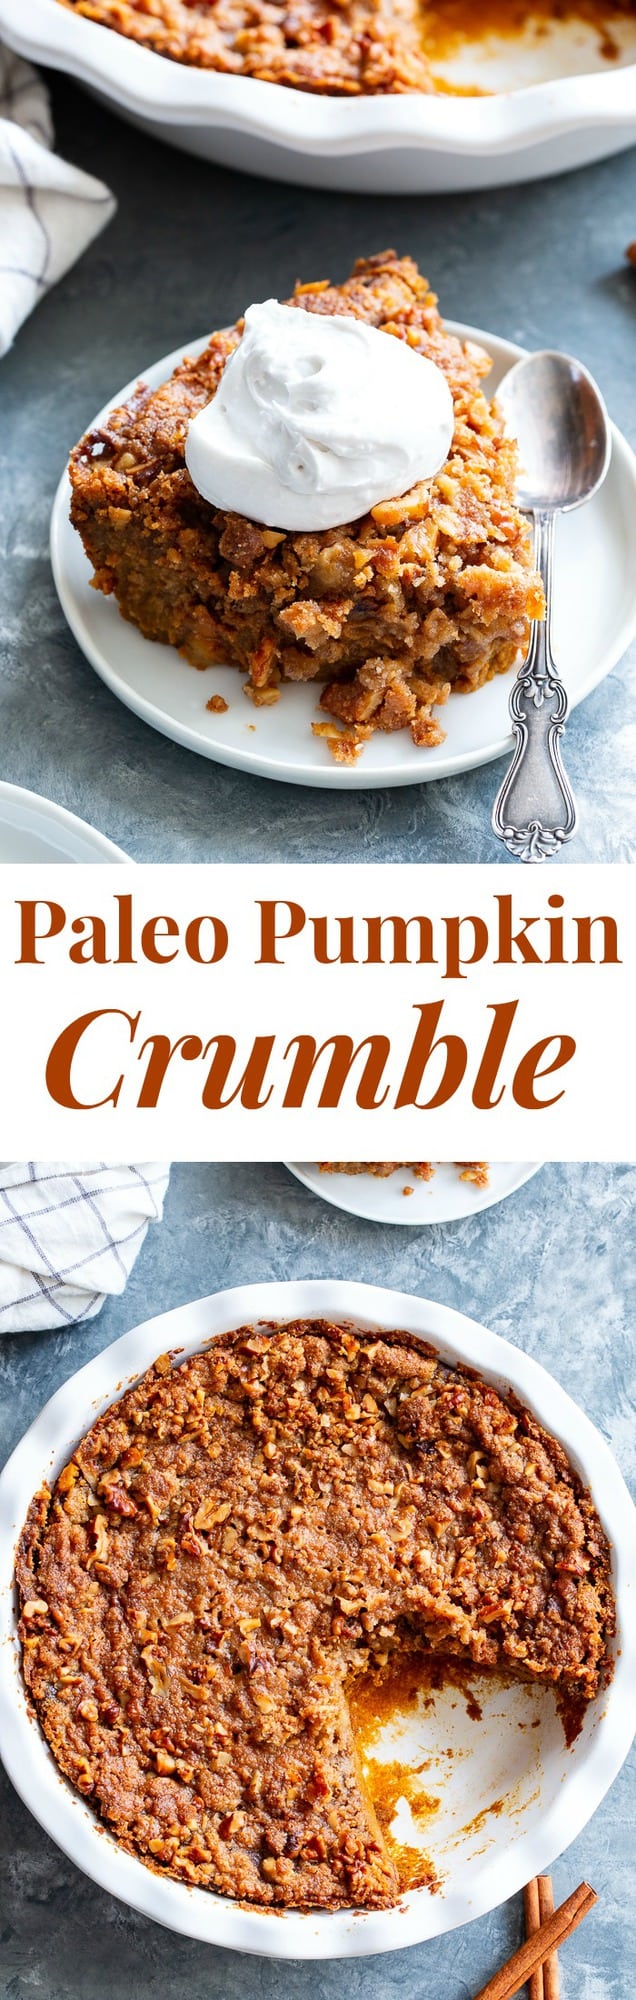 This Pumpkin Crumble has all the delicious flavors of pumpkin pie but it’s so much easier to make!  A creamy pumpkin layer is topped with a crunchy toasty grain free crumble and baked until golden brown.  Perfect for any holiday table and delicious with a dollop of whipped cream!  Paleo, gluten-free.